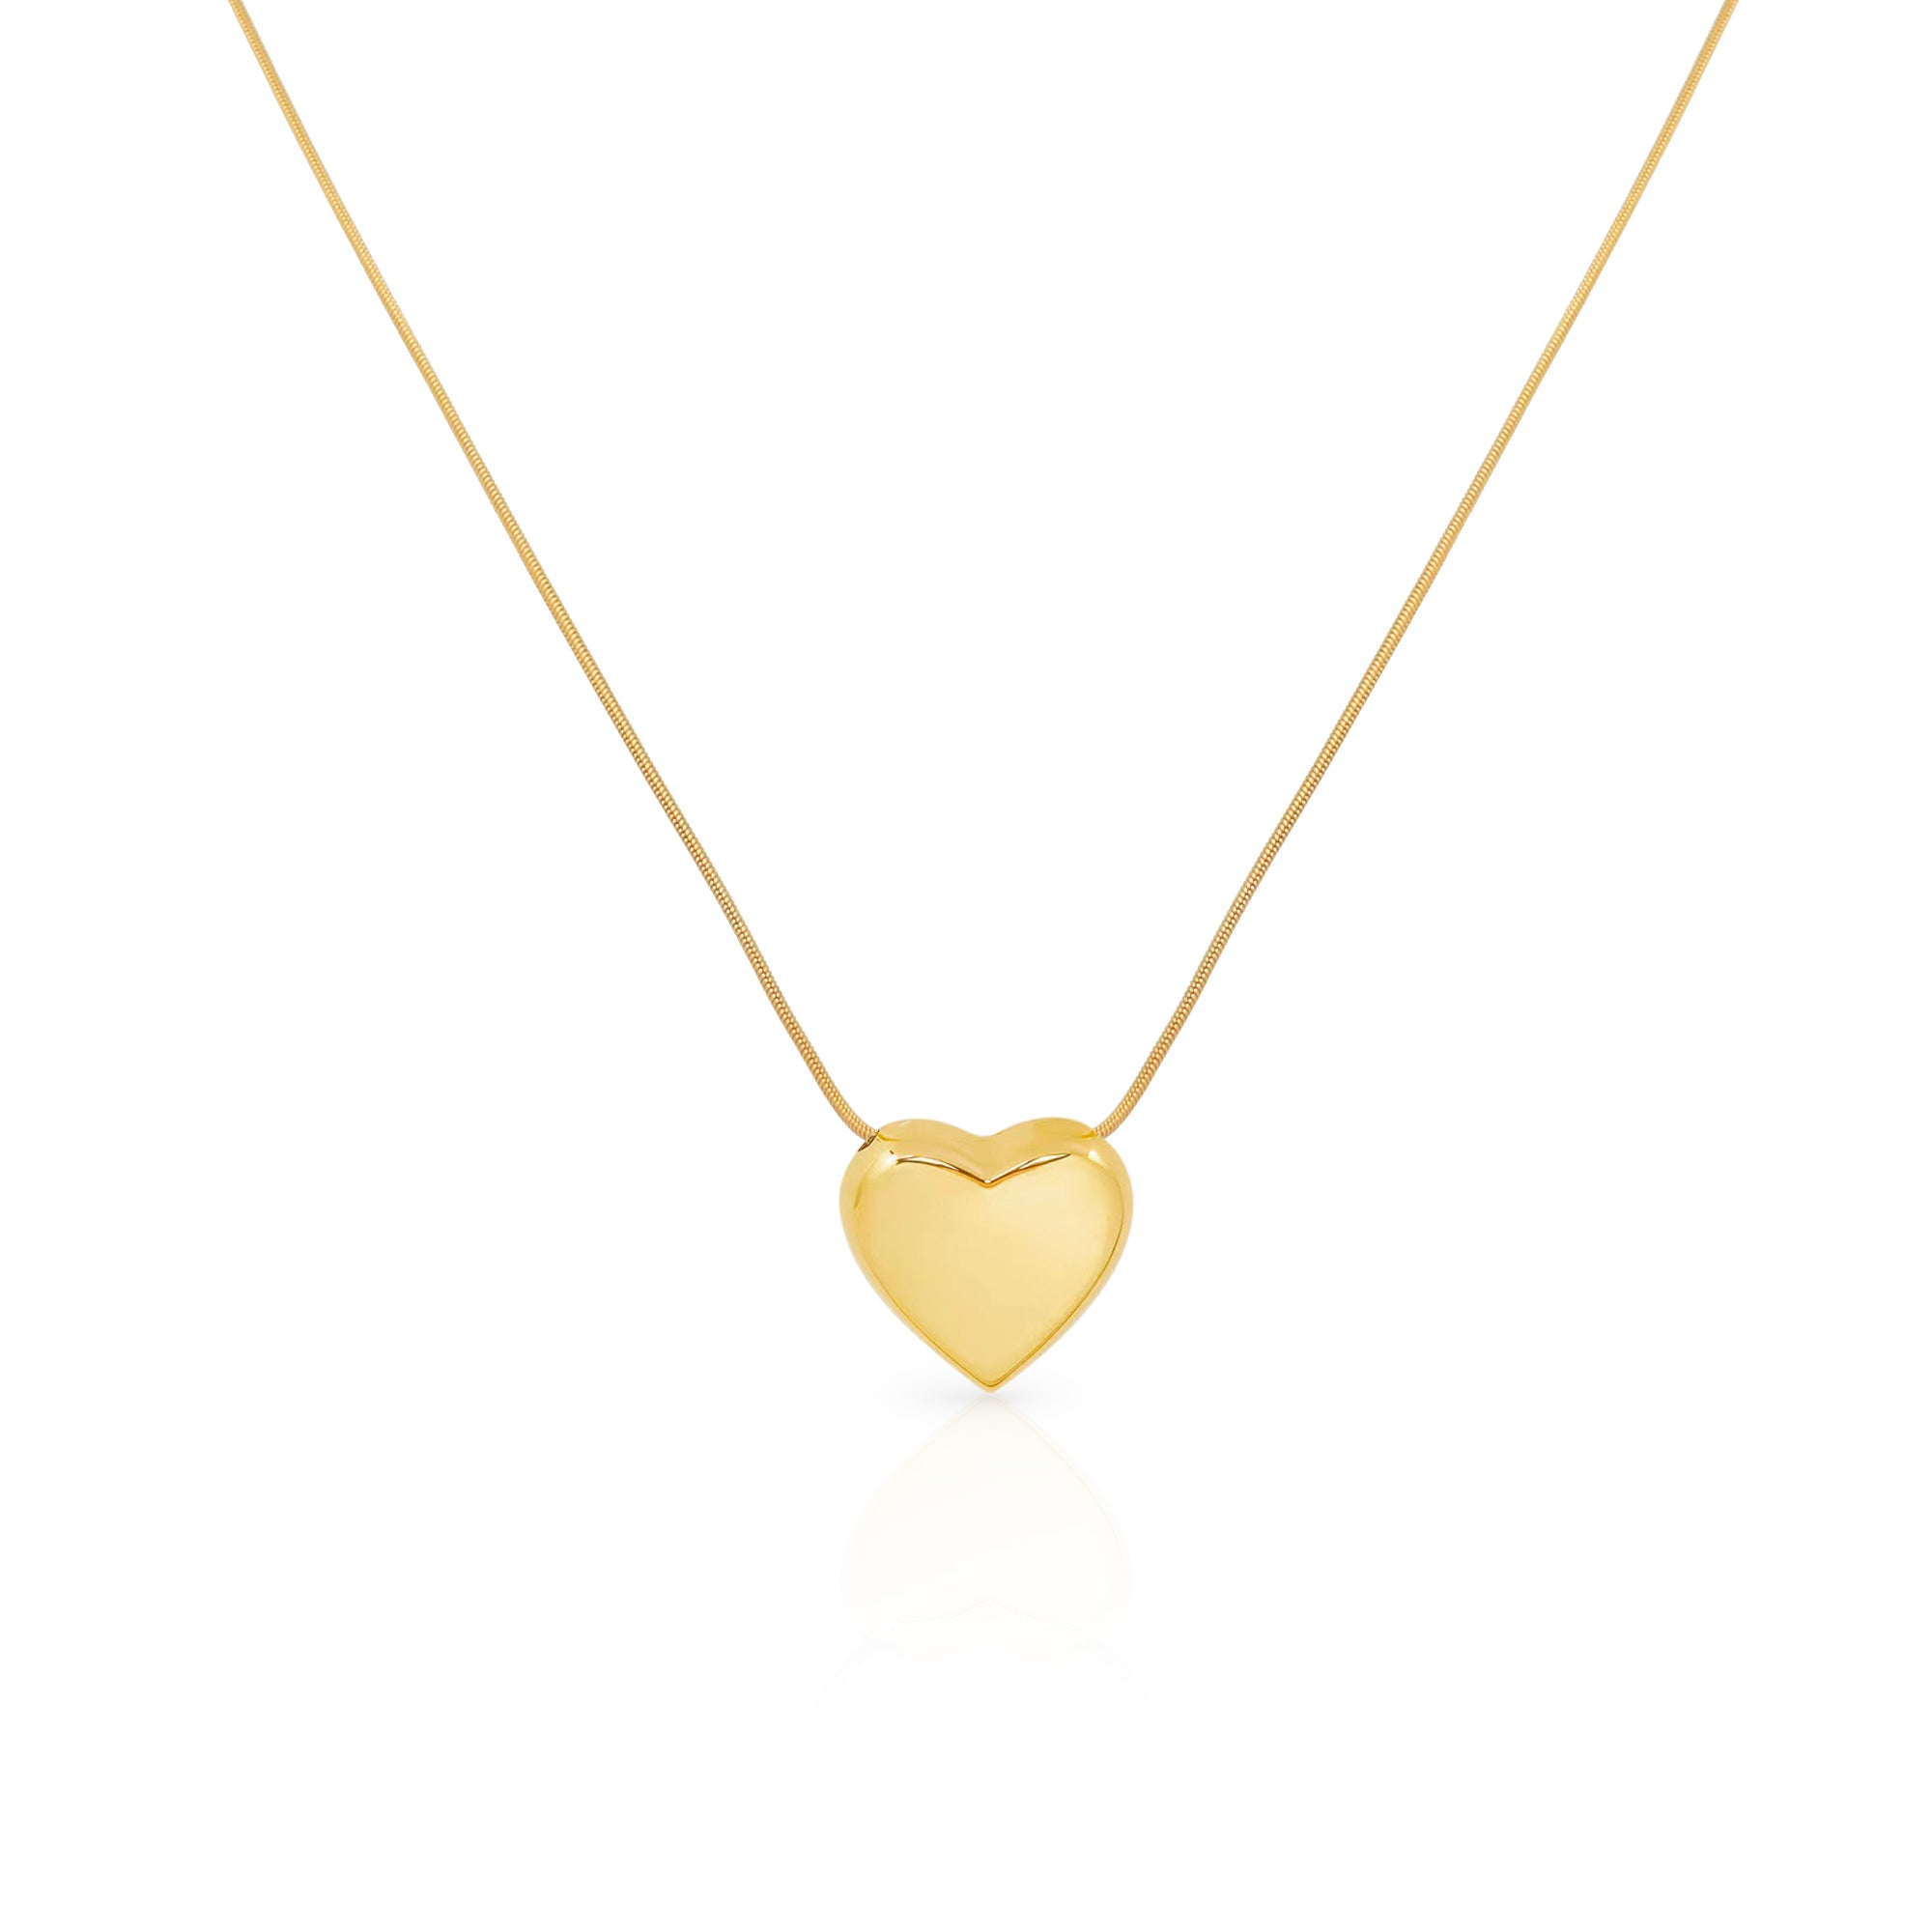 The Stole Your Heart Puff Gold Necklace